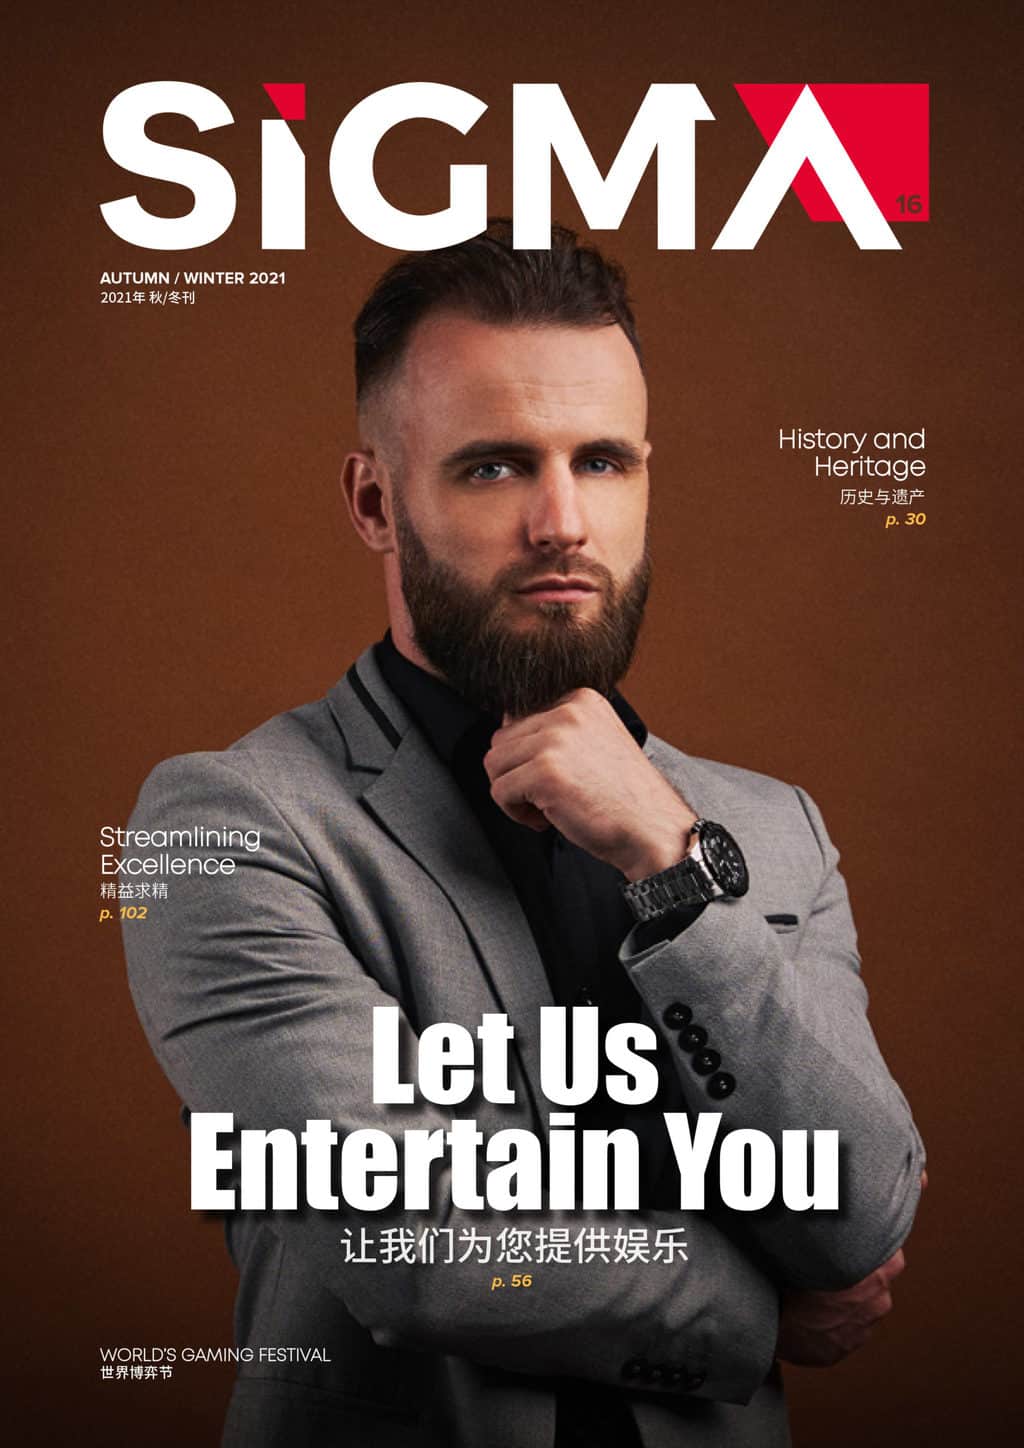 SiGMA Issue 16: Let us entertain you